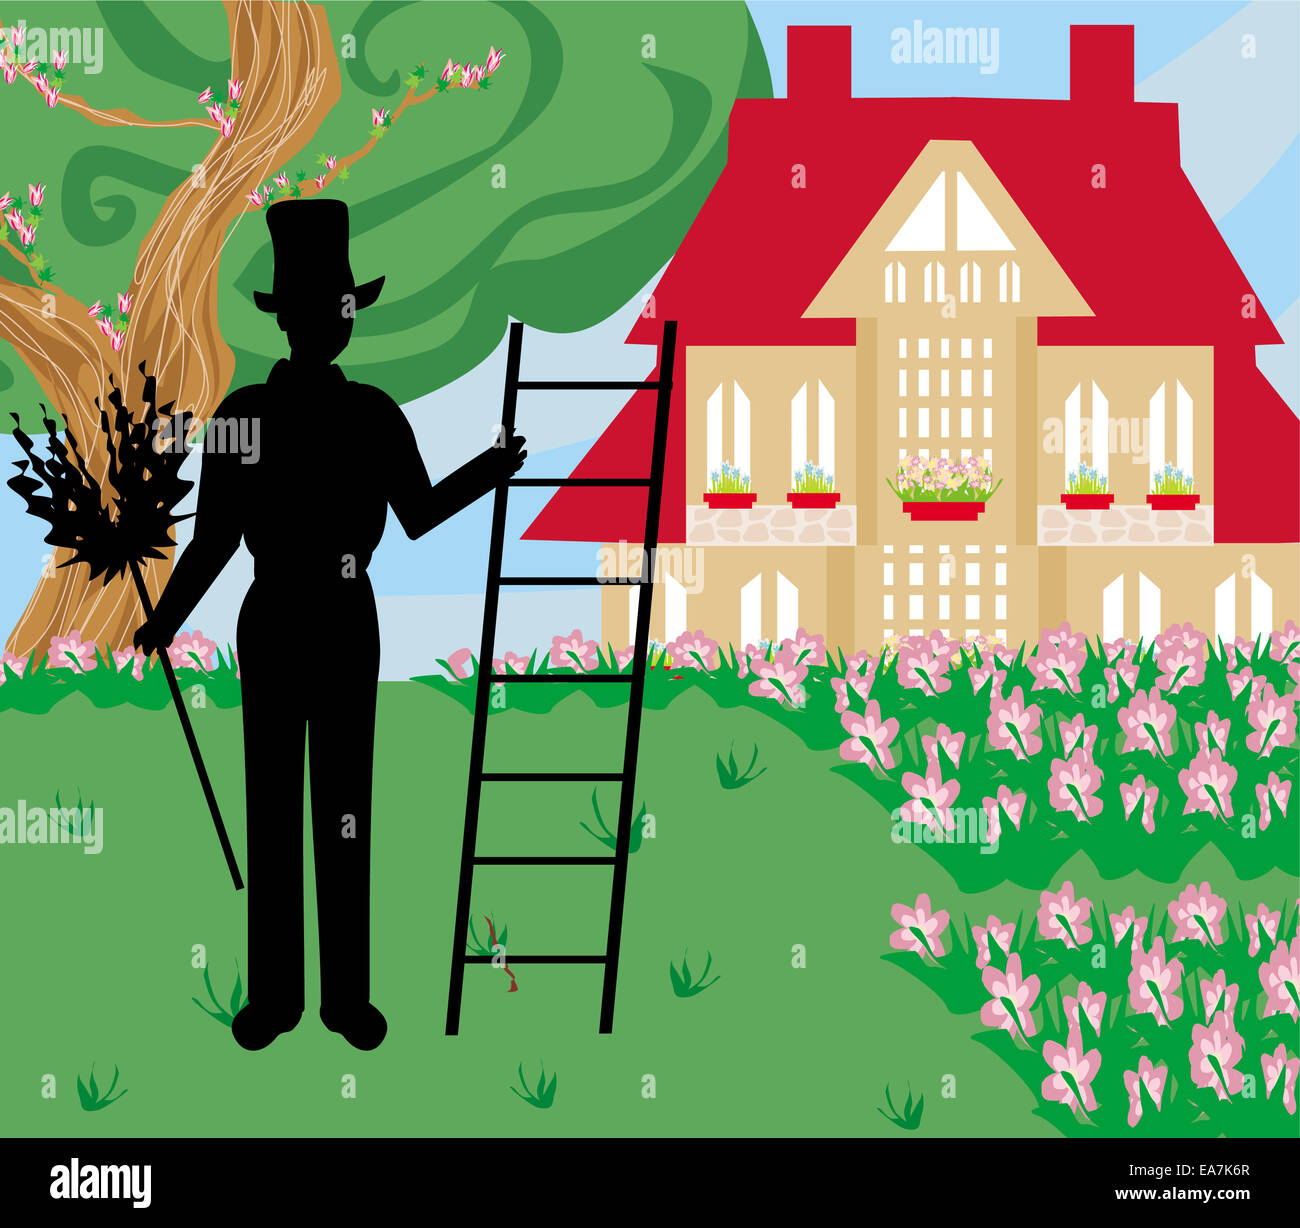 illustration of chimney sweeper at work Stock Photo